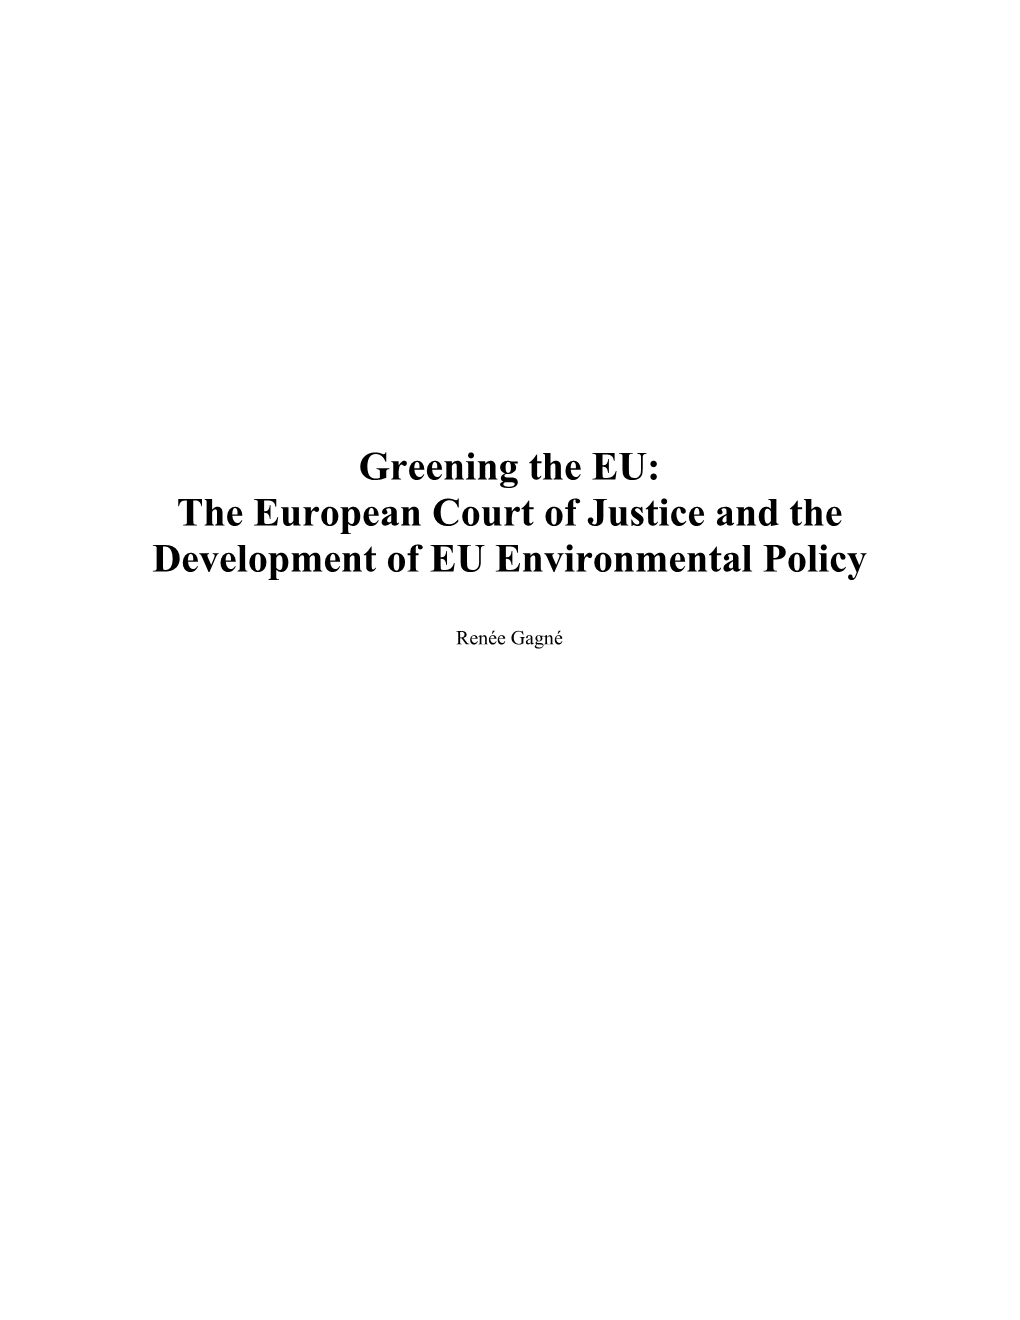 The European Court of Justice and the Development of EU Environmental Policy